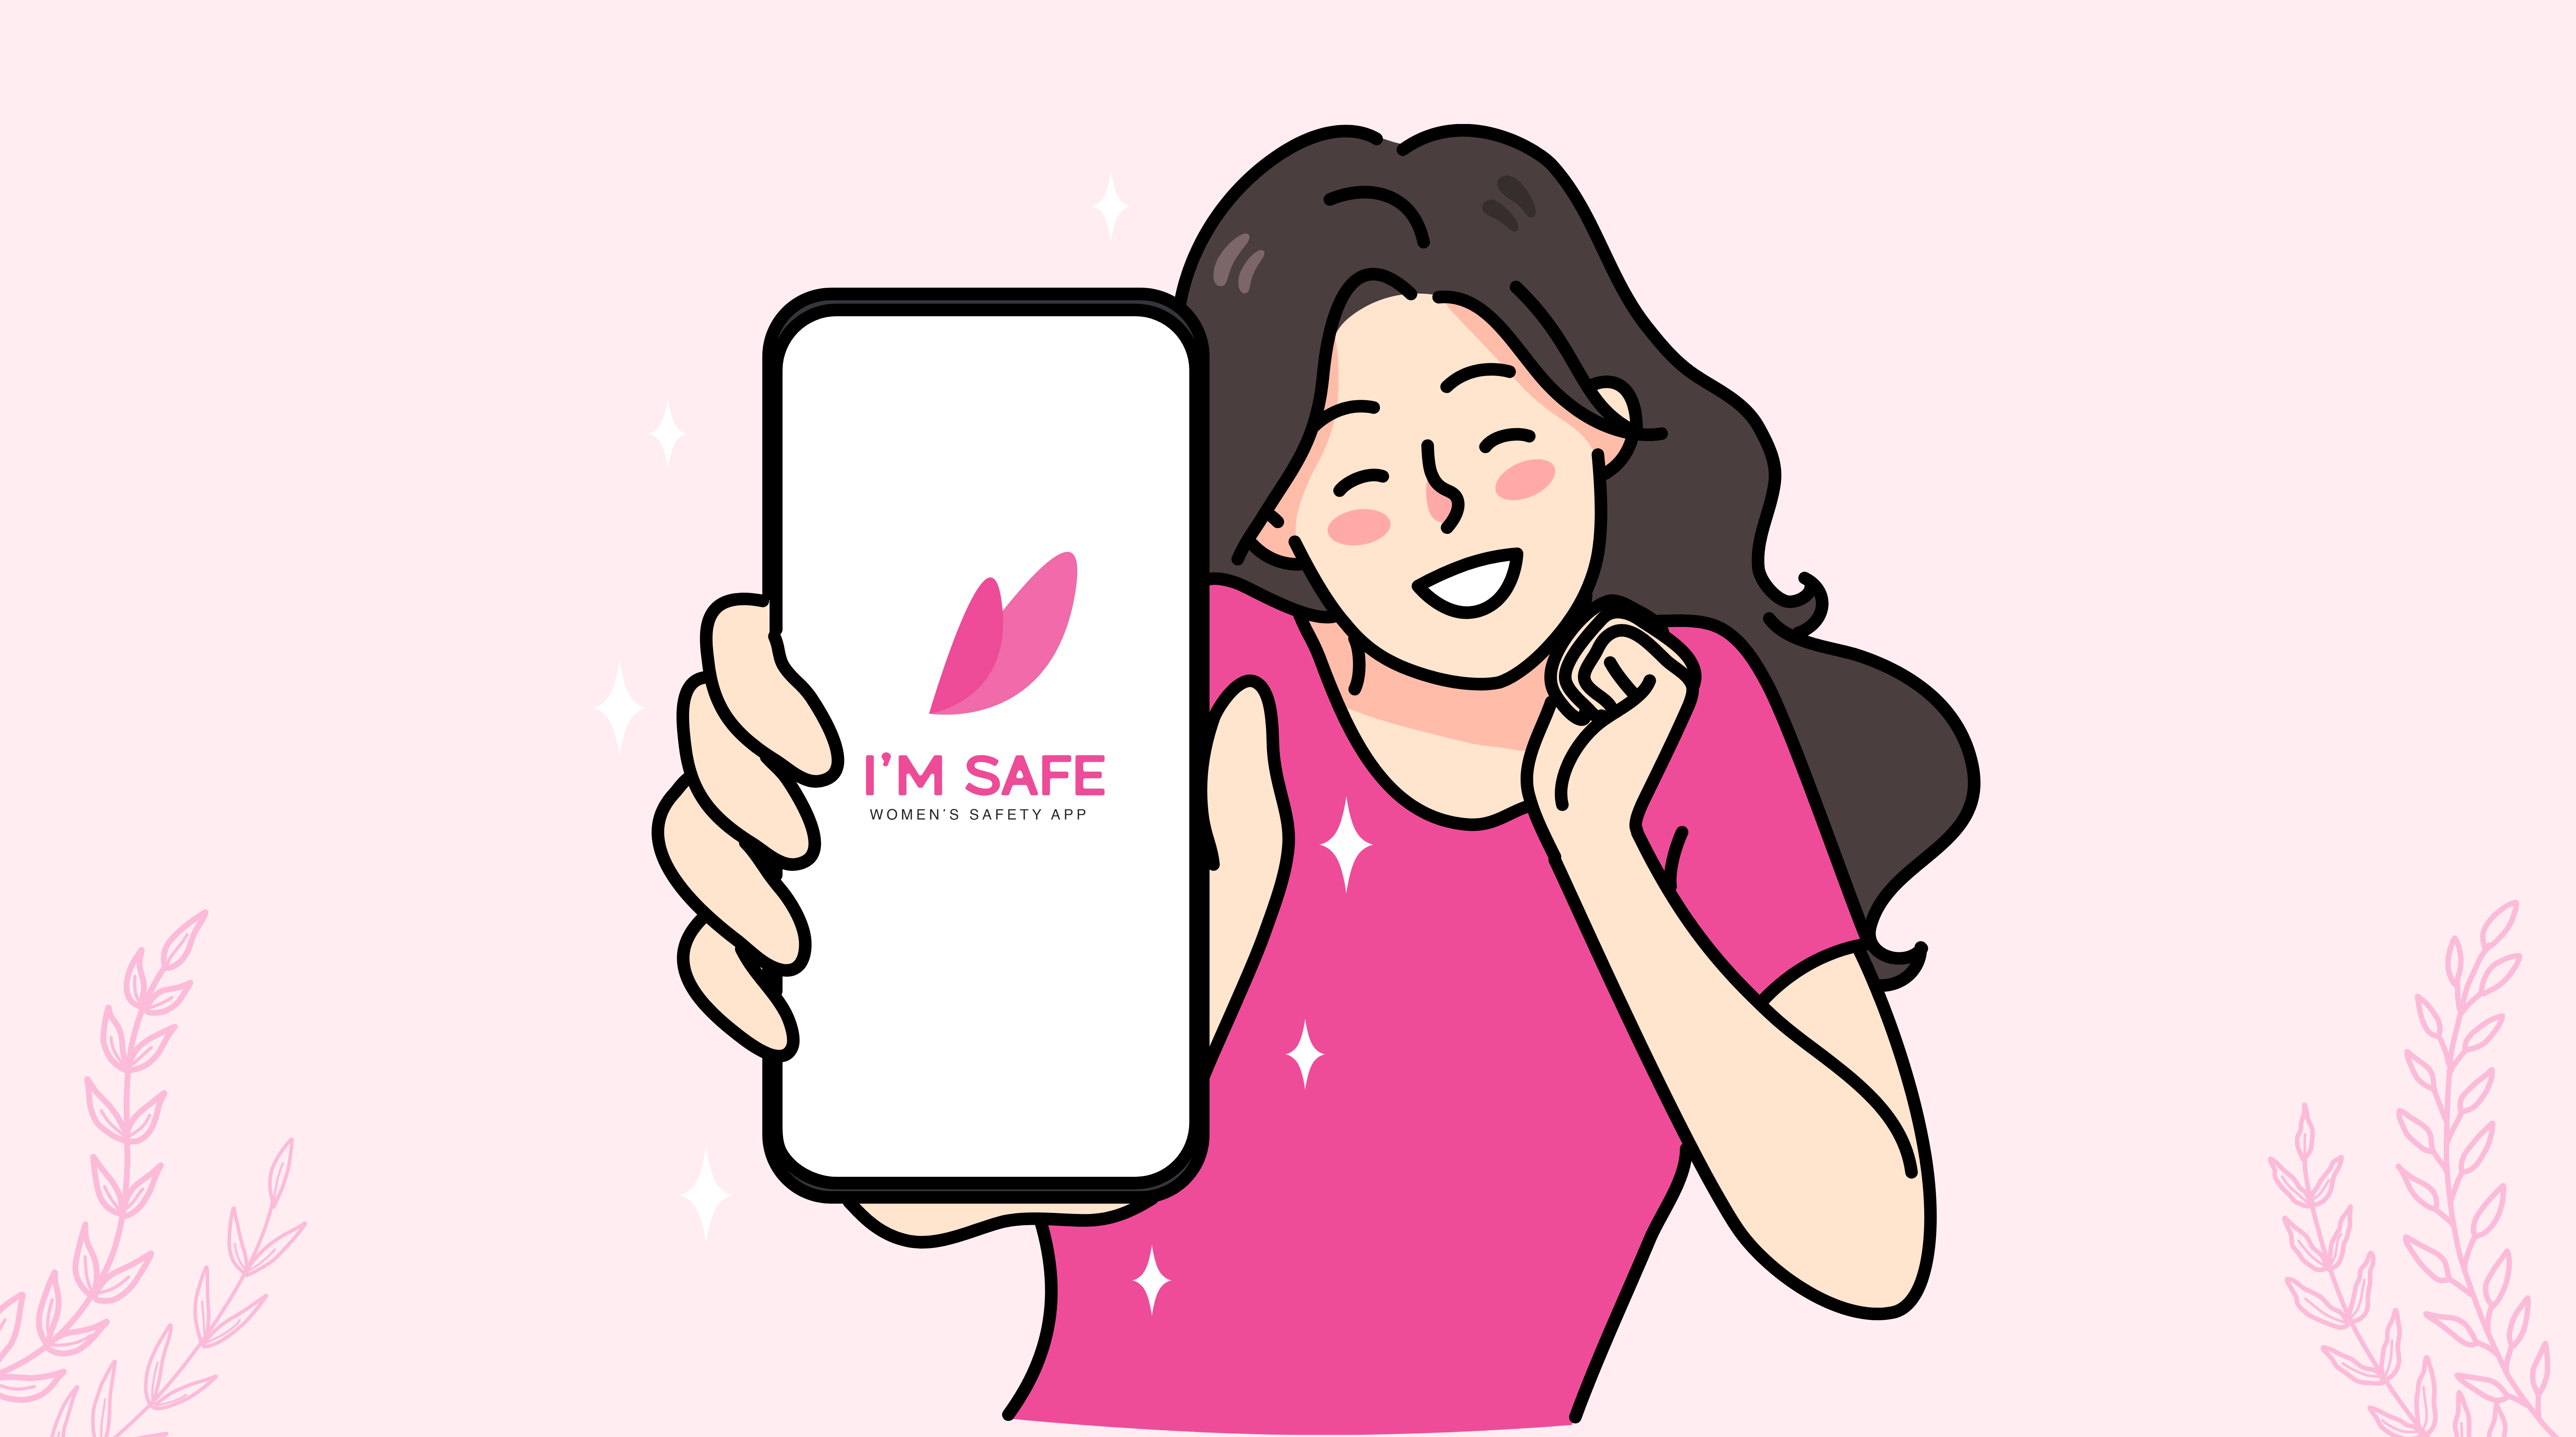 Why is women safety app important?